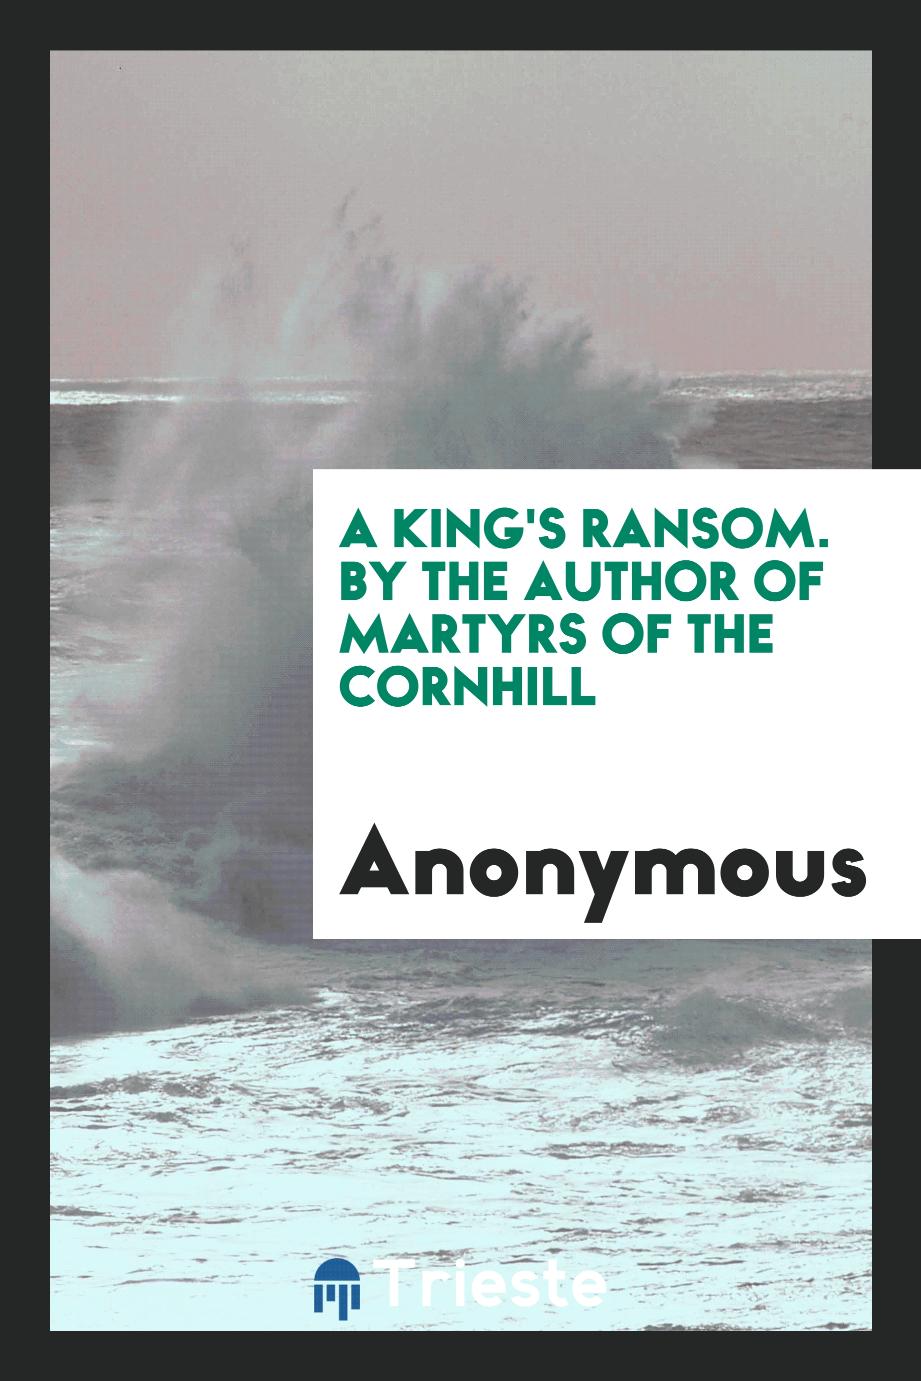 A King's Ransom. By the Author of Martyrs of the Cornhill